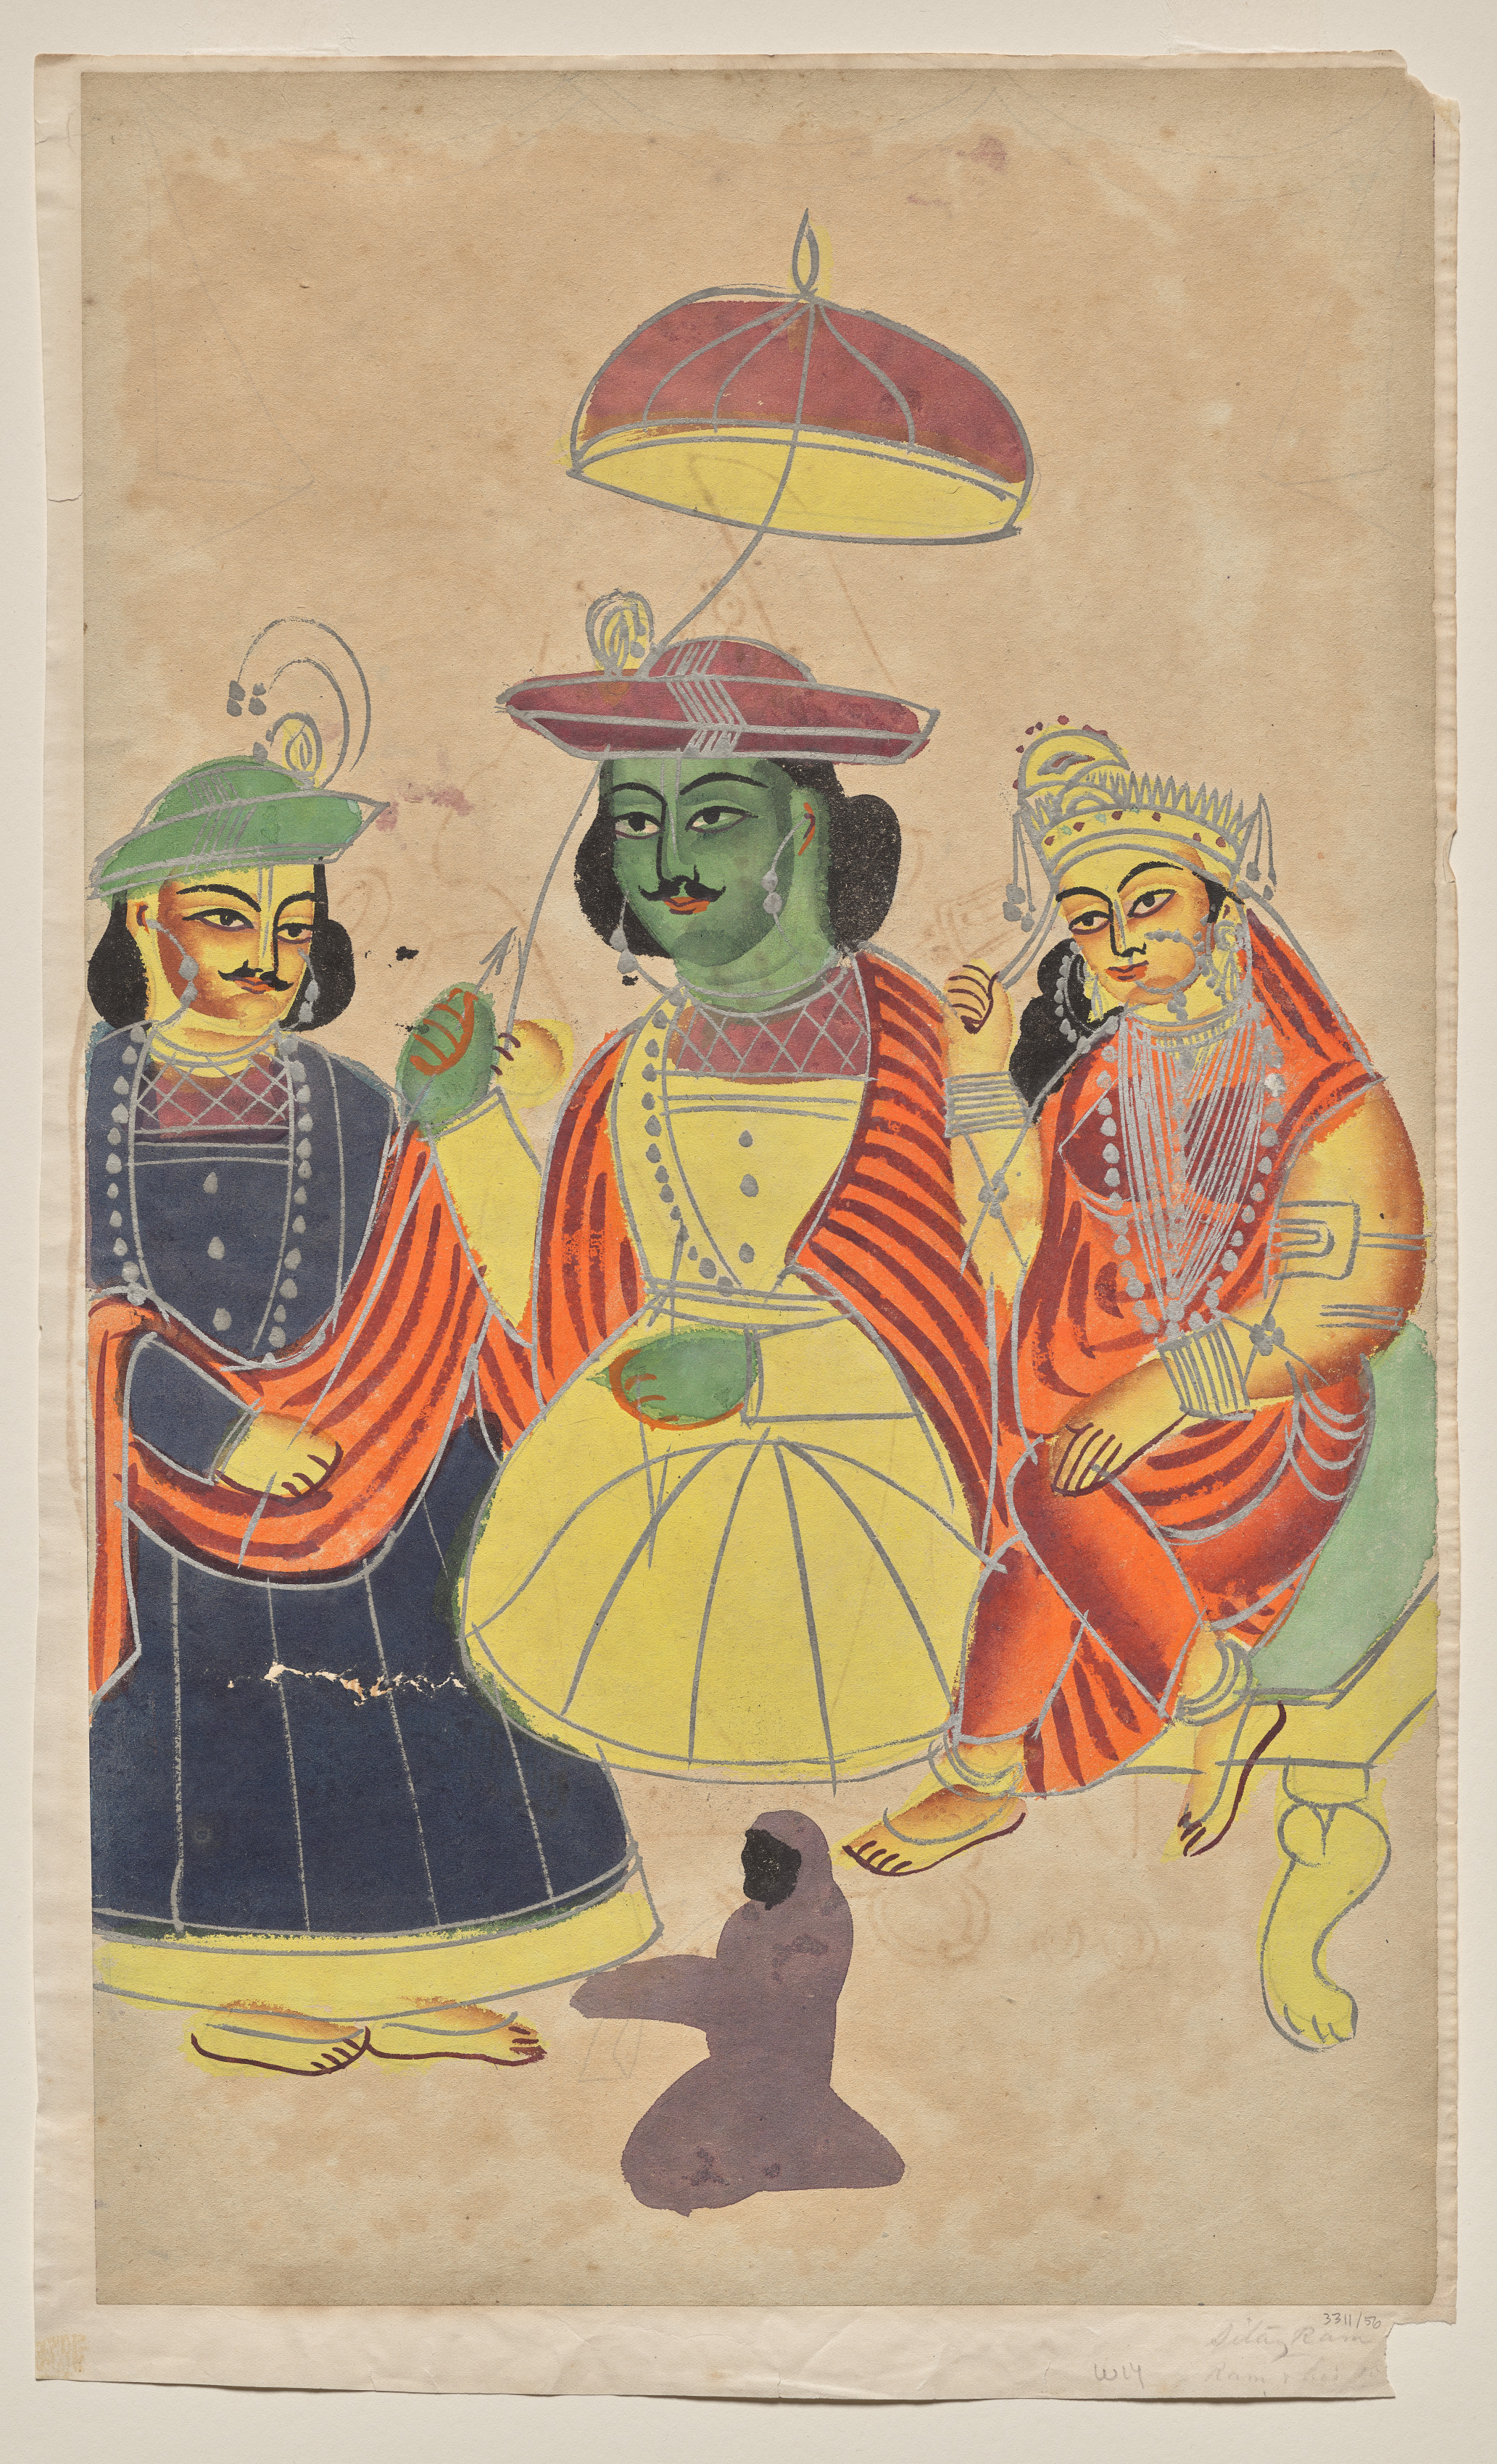 Rama and Sita enthroned with Lakshmana and Hanuman attending, from a Kalighat album